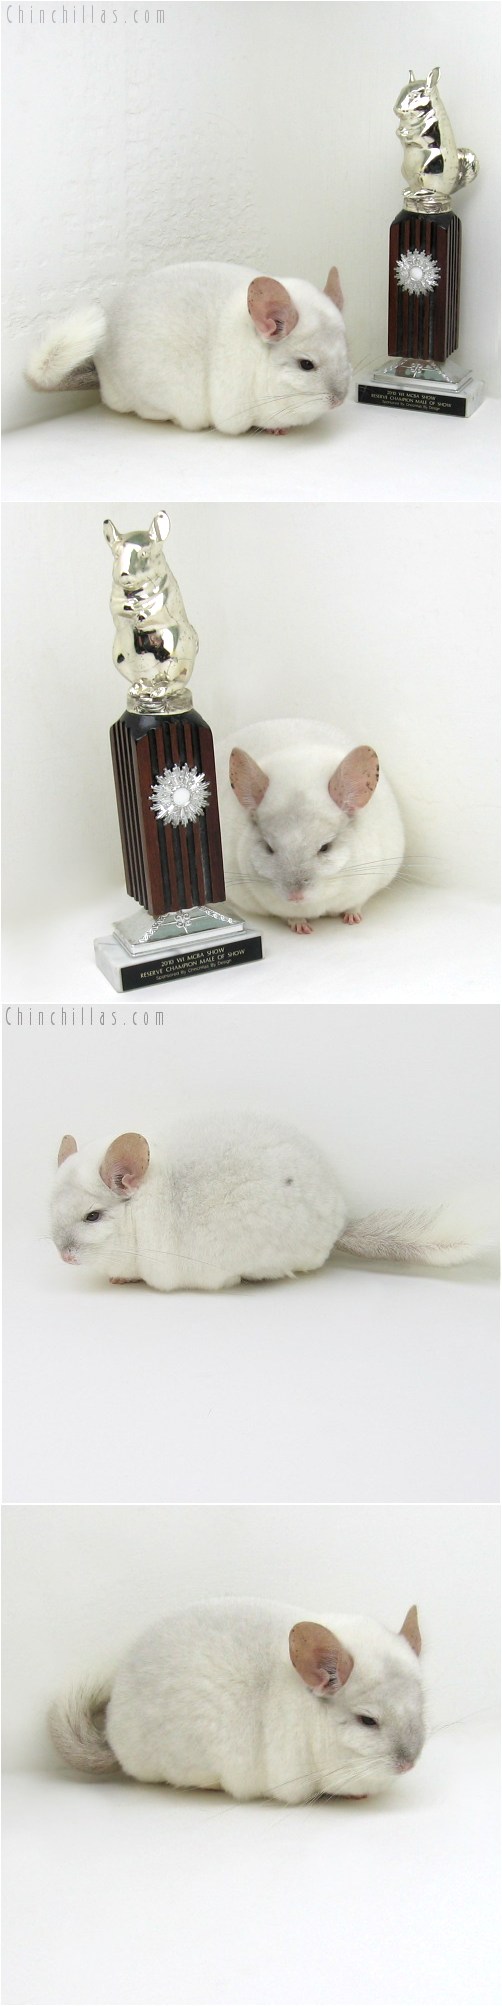 10076 Extra Extra Large Herd Improvement Quality Pink White Male Chinchilla